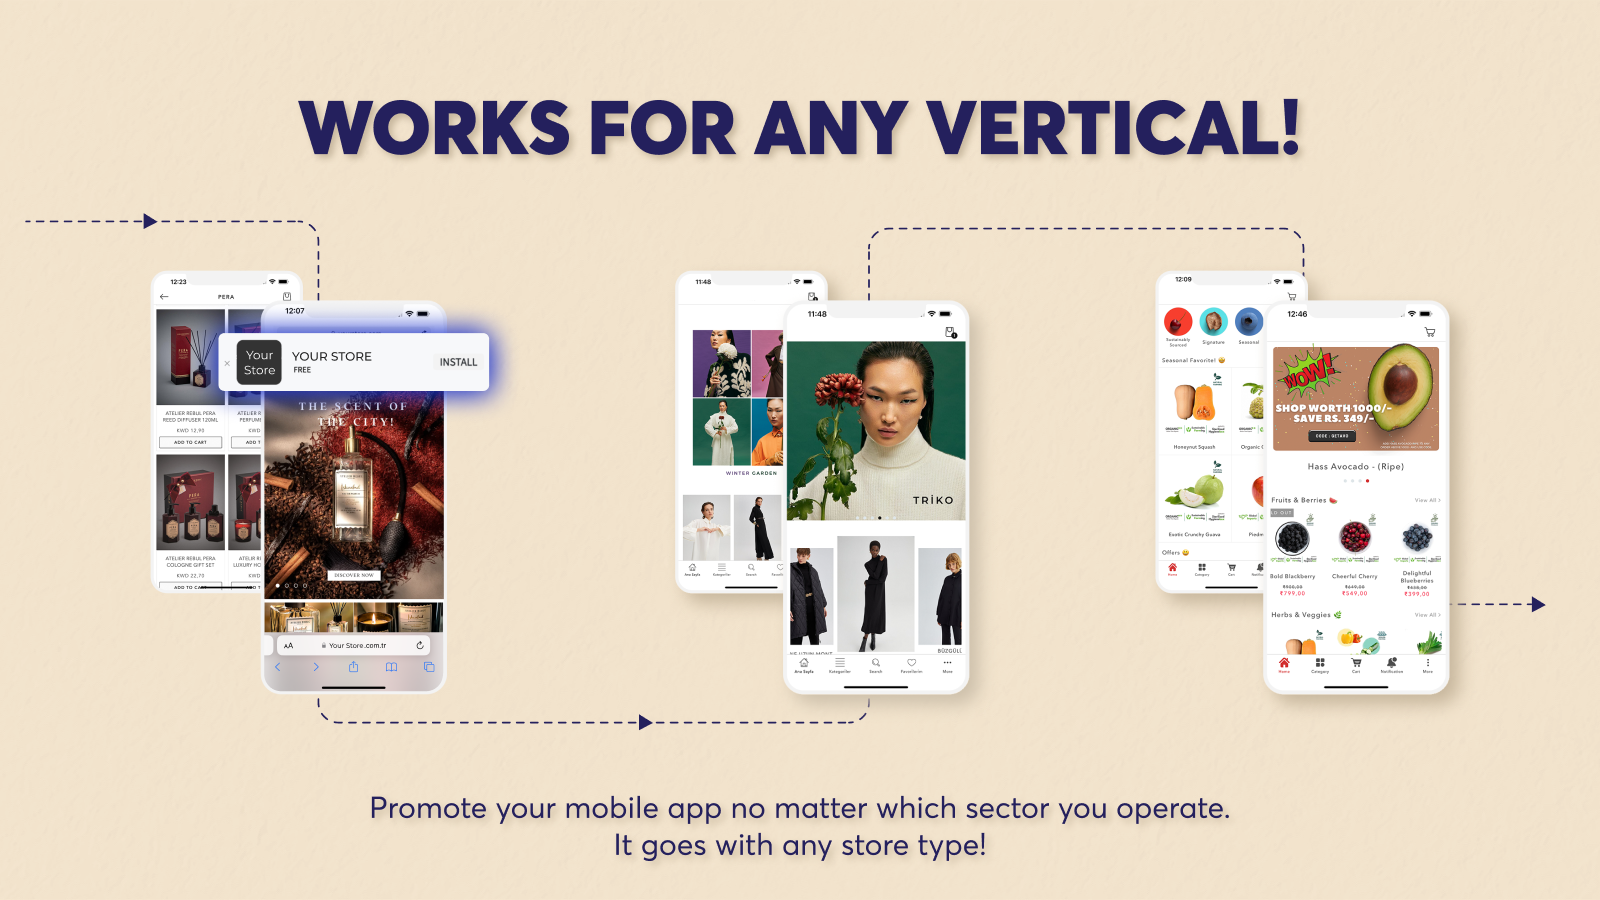 Works for mobile apps in any vertical and sector